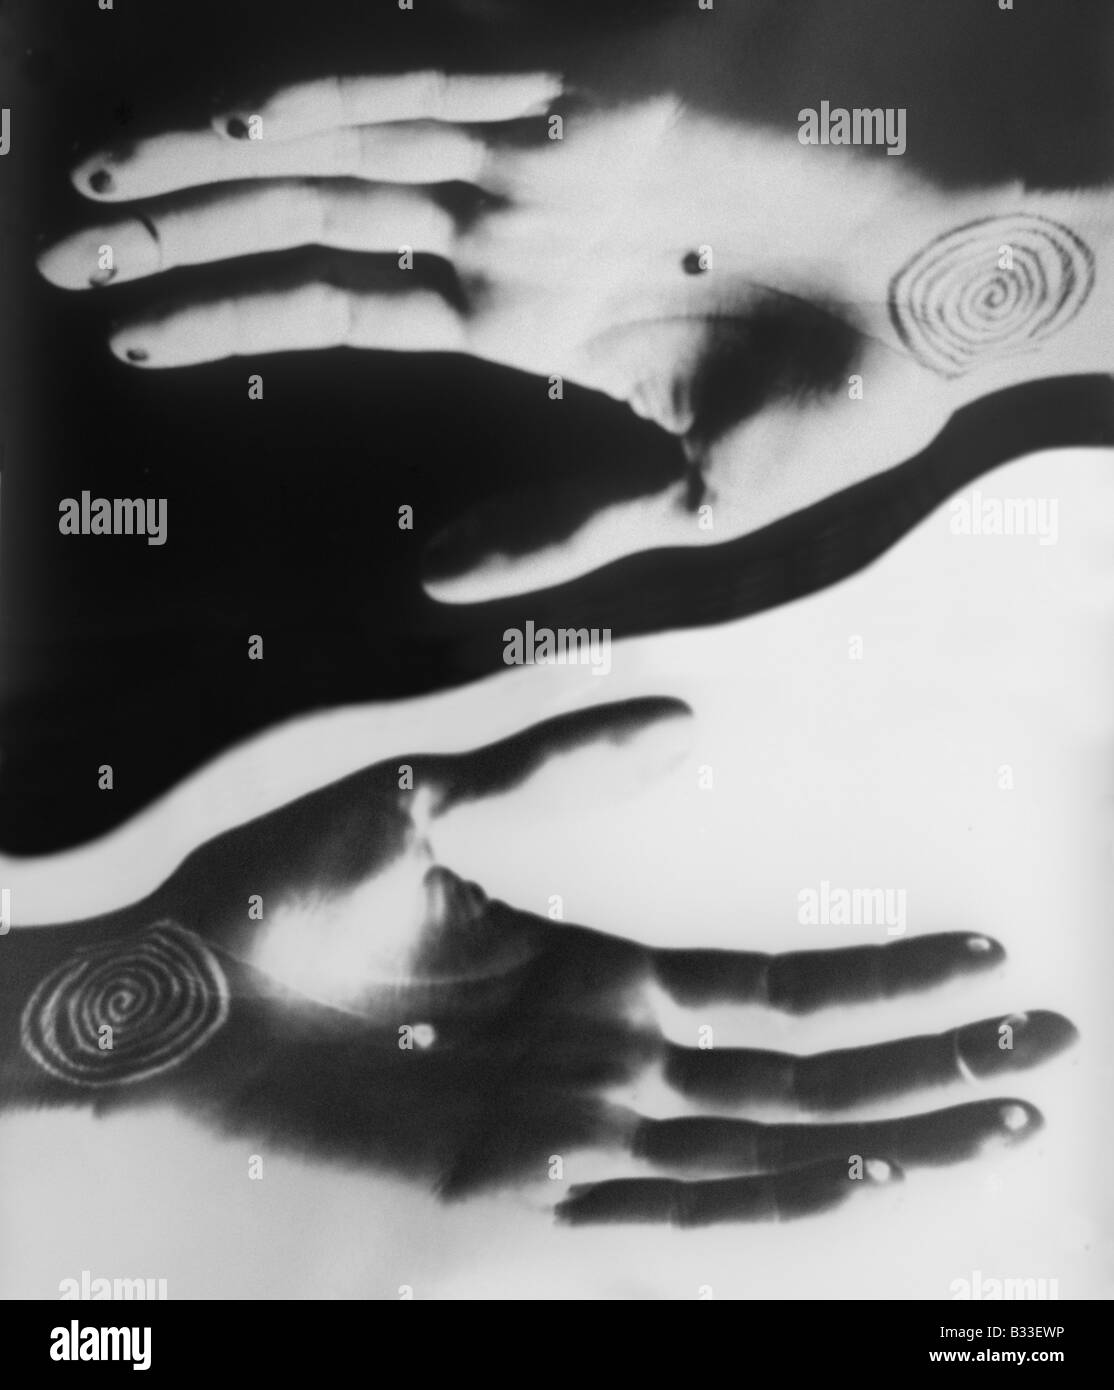 Positive negative hands with spiral and dot tattoos seeming to offer balance by the offset position of one hand over the other Stock Photo